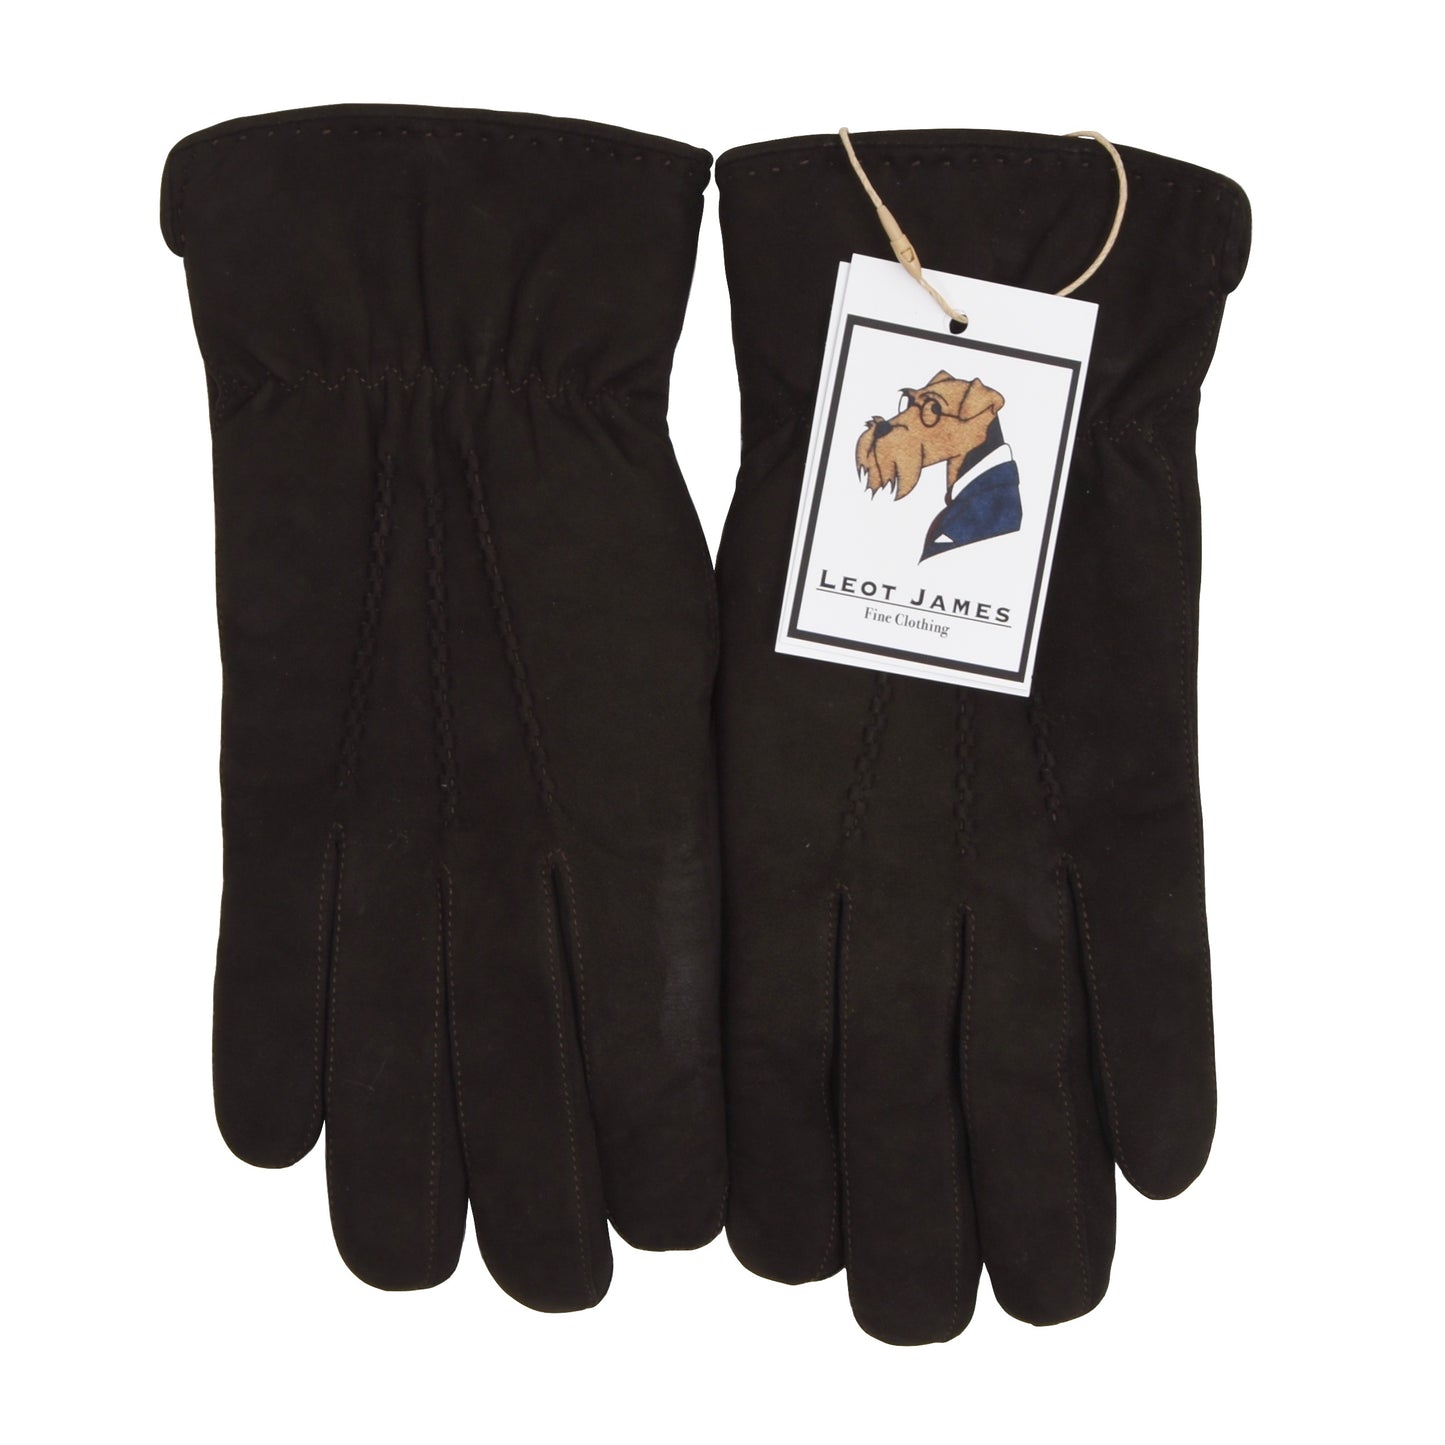 RIKA Wien Curly Shearling Gloves Size 8.5 - Chocolate Brown